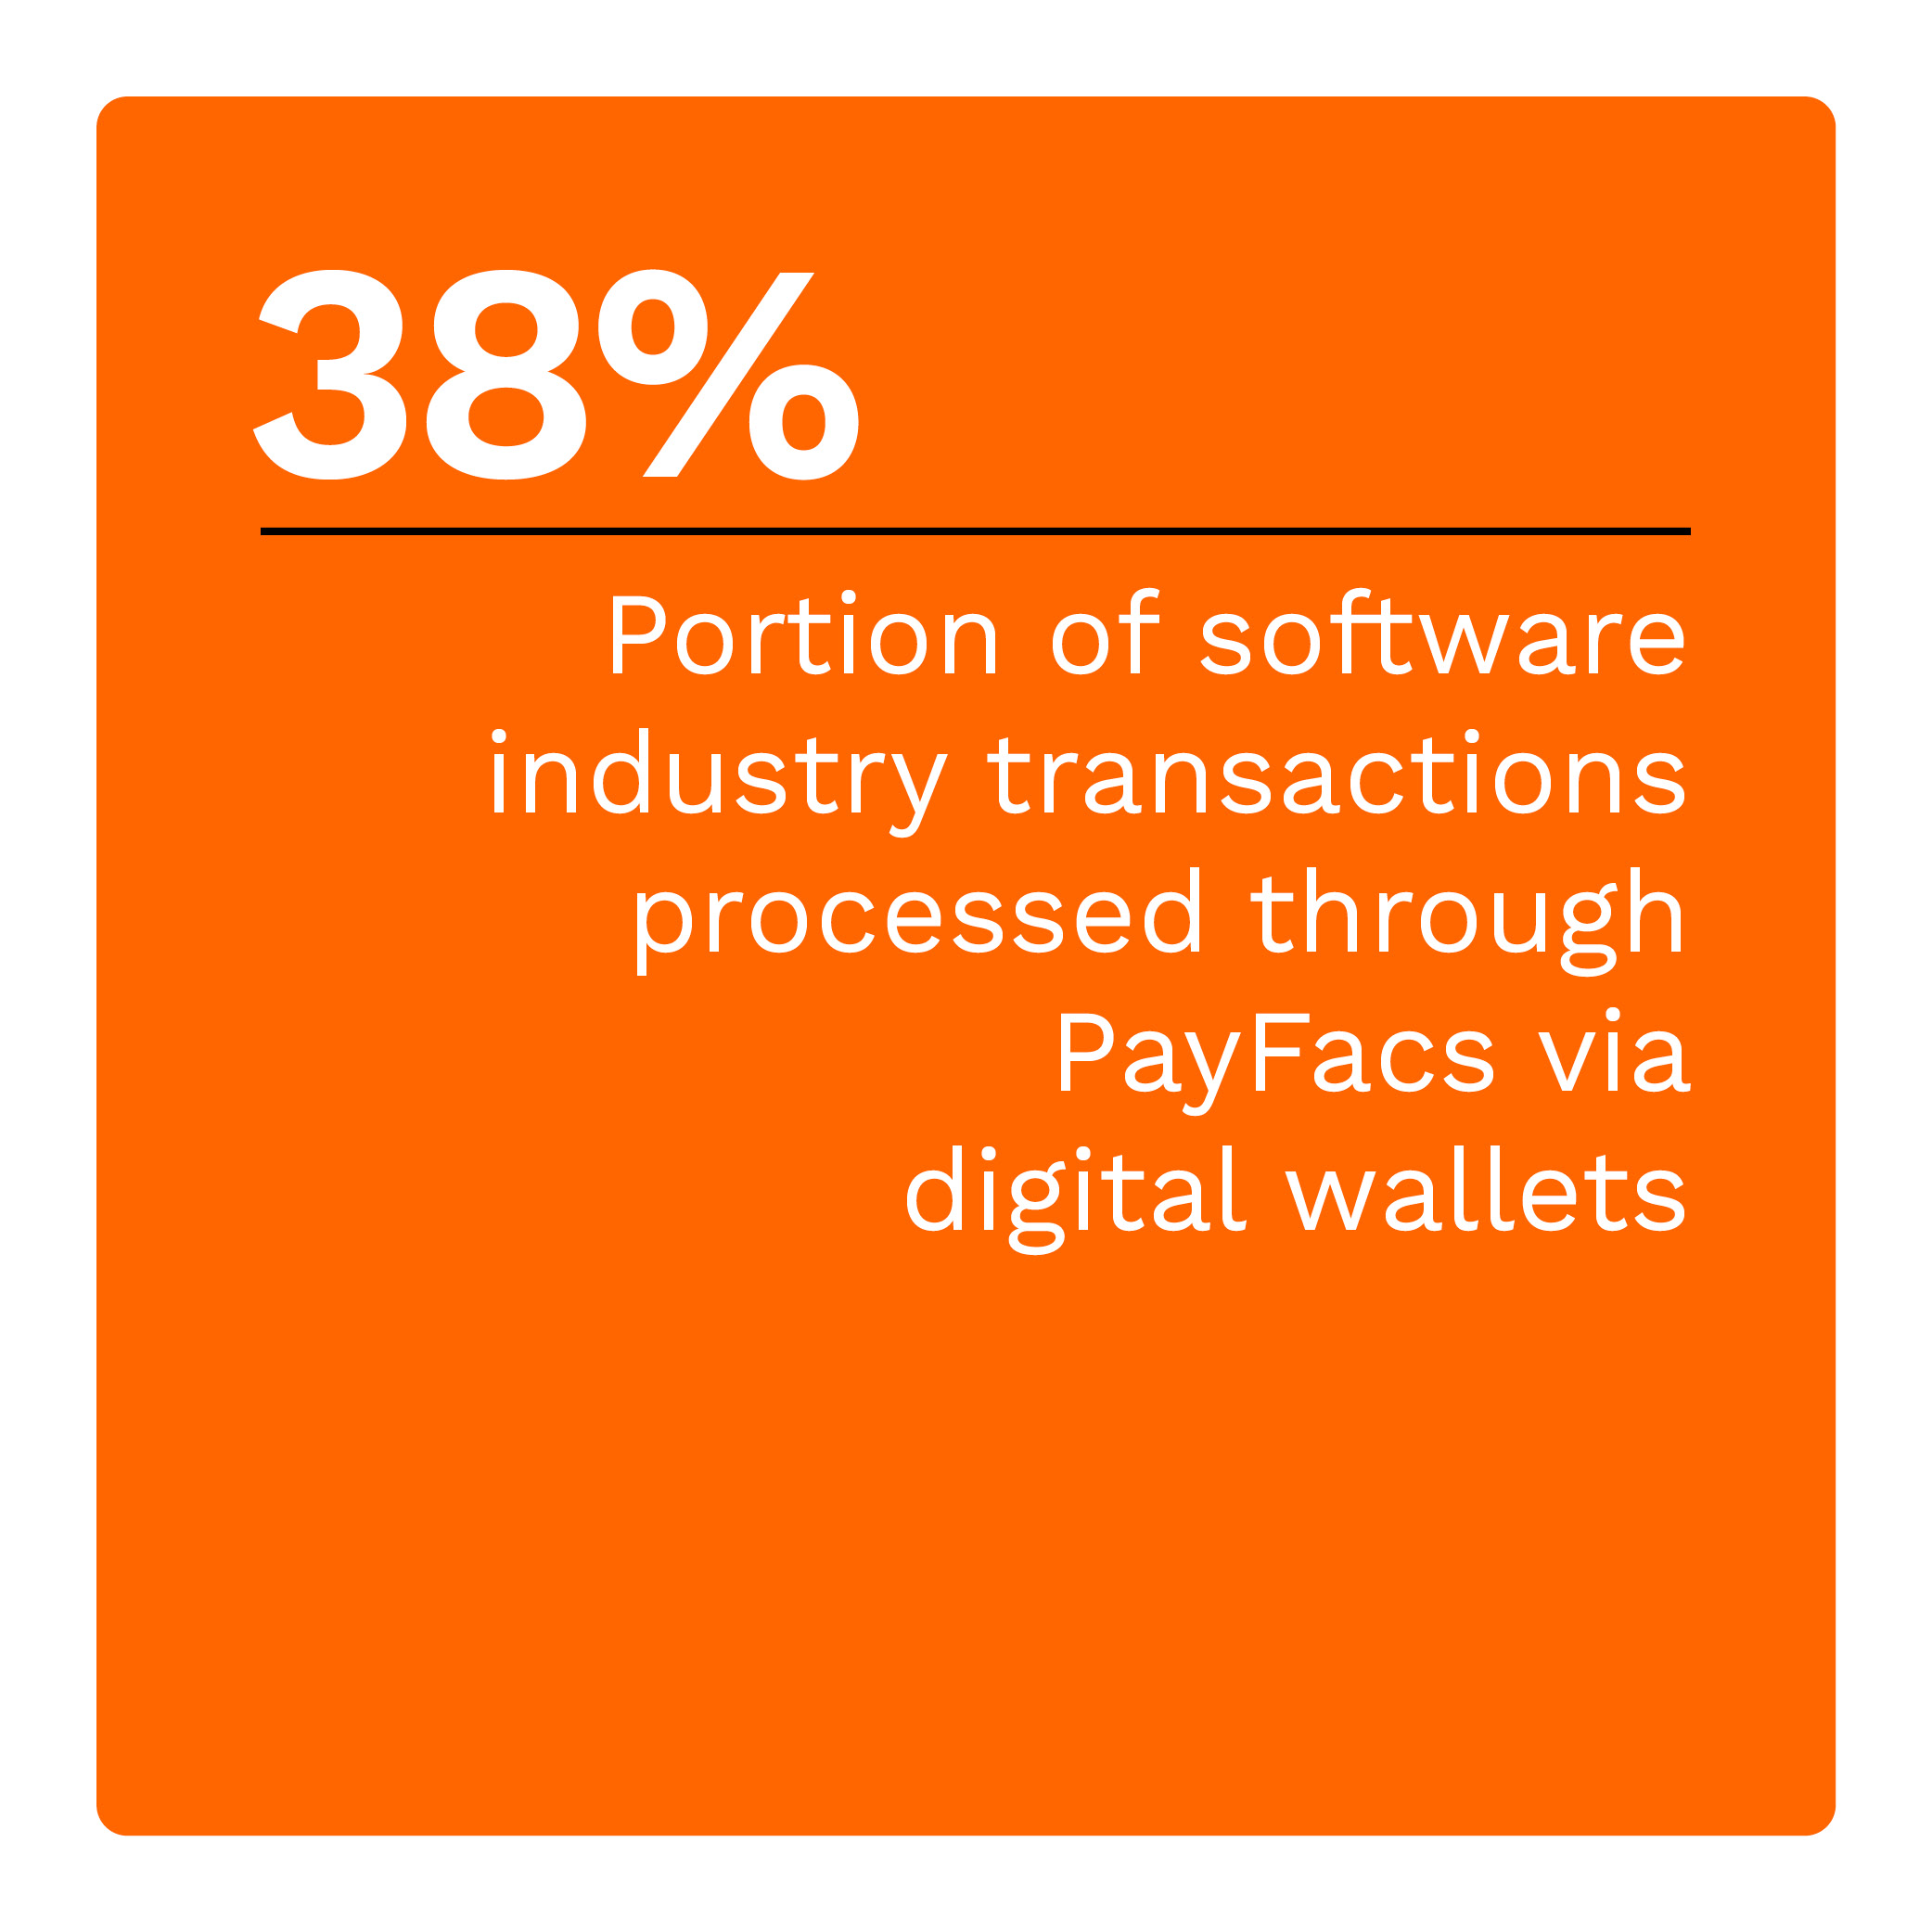 38%: Portion of software industry transactions processed through PayFacs via digital wallets